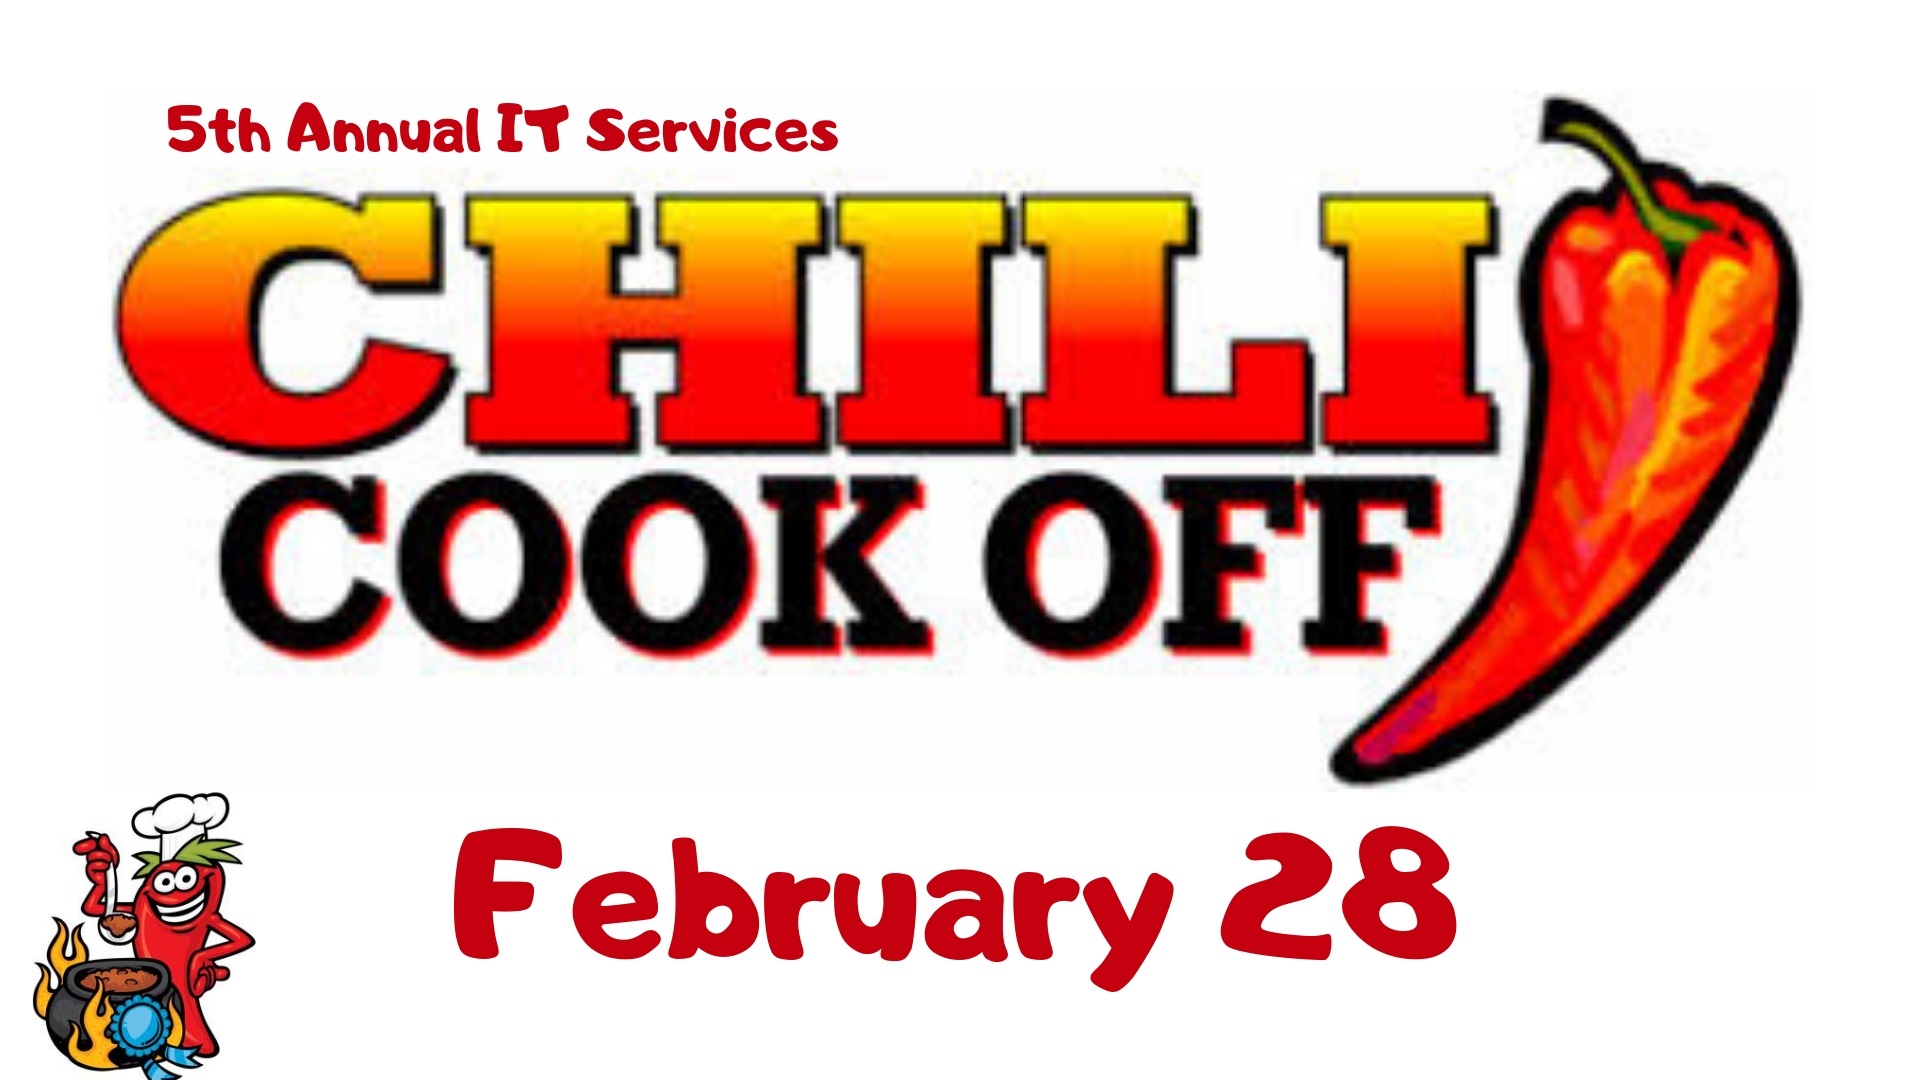 5th annual IT Services chili cook-off february 28